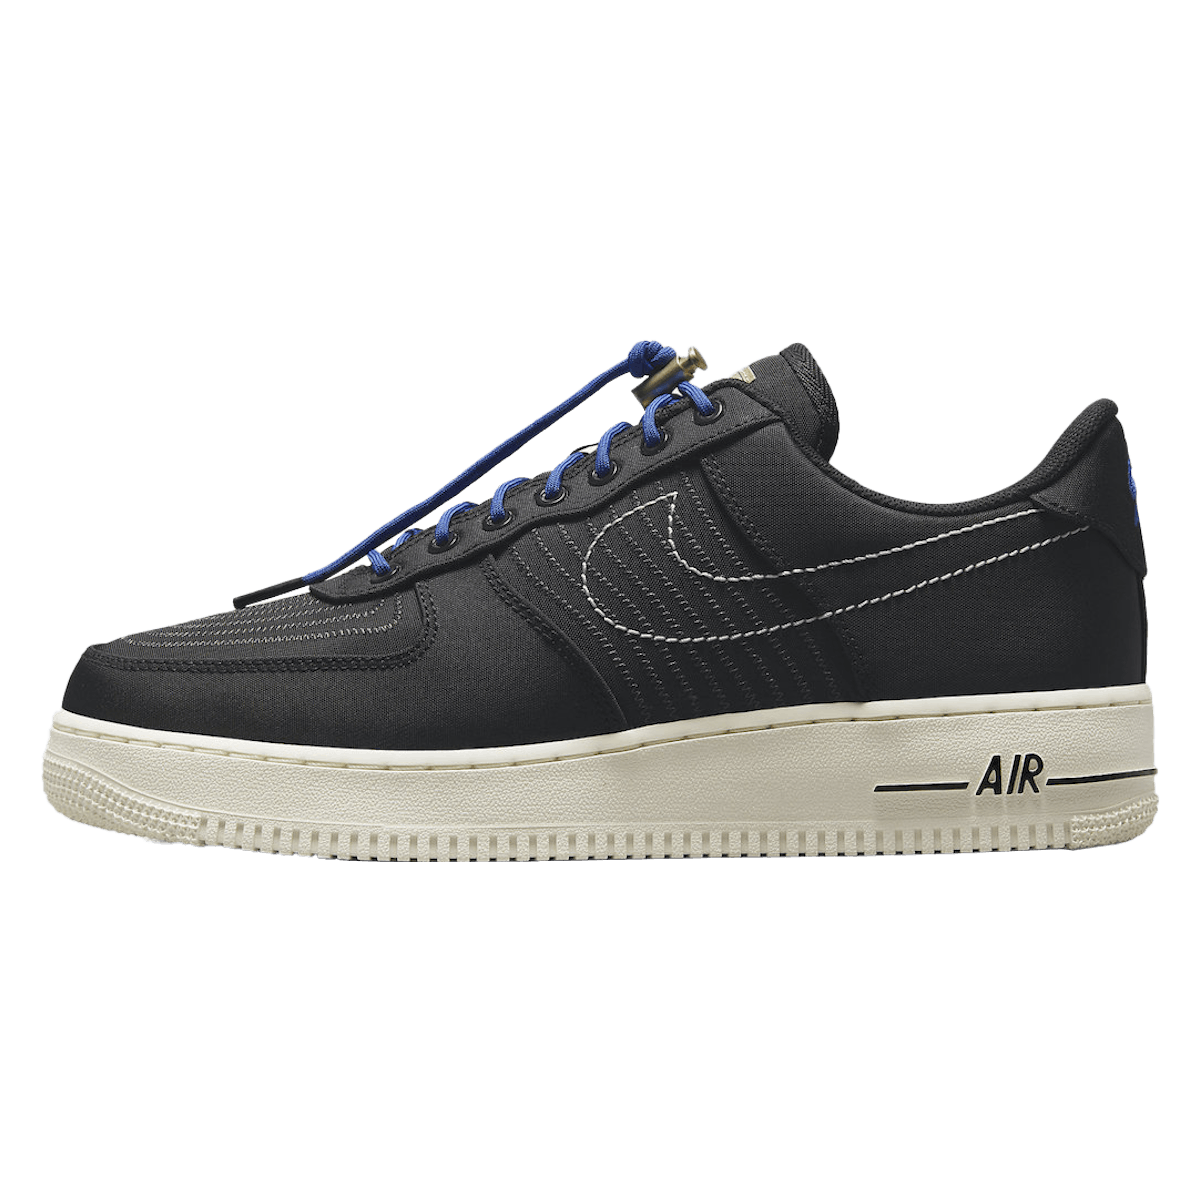 Nike Air Force 1 Low "Moving Company" Black